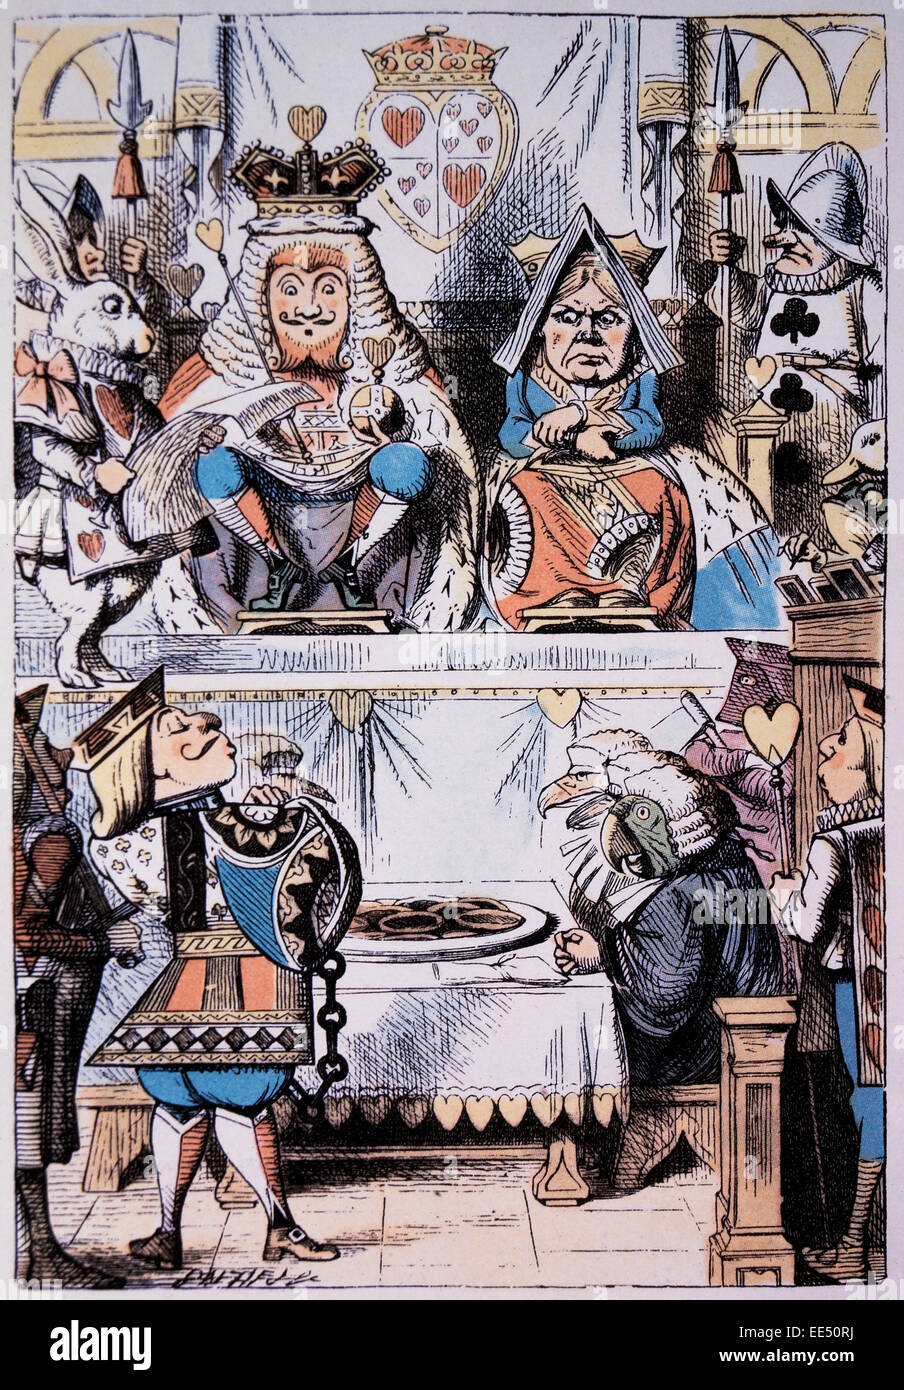 King and Queen of Hearts at the trial of the Knave of Hearts, Alice's Adventure in Wonderland by Lewis Carroll, Hand-Colored Illustration, Circa 1865 Stock Photo